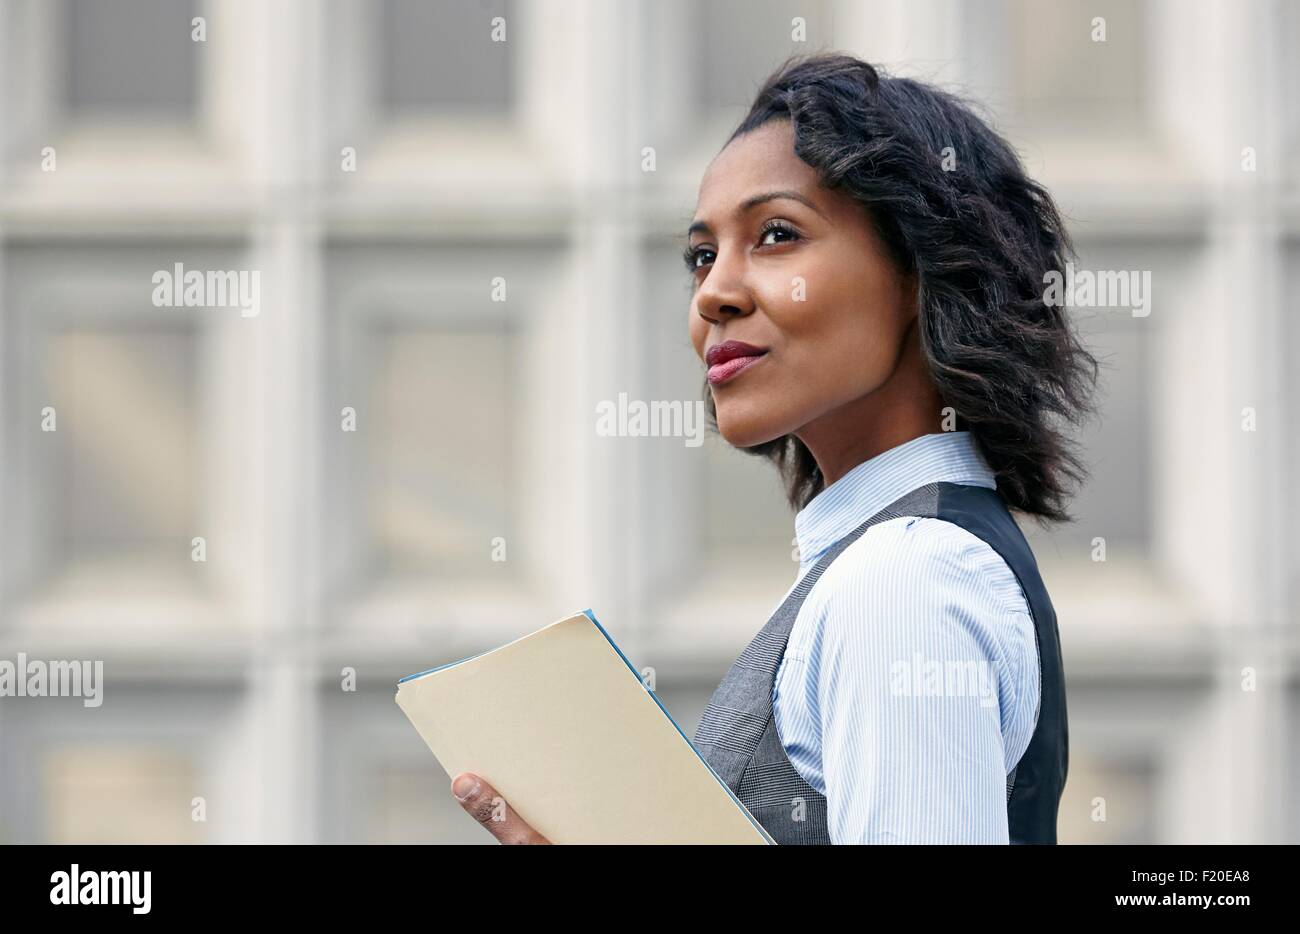 Professional Business Woman Stock Photos, Images and Backgrounds